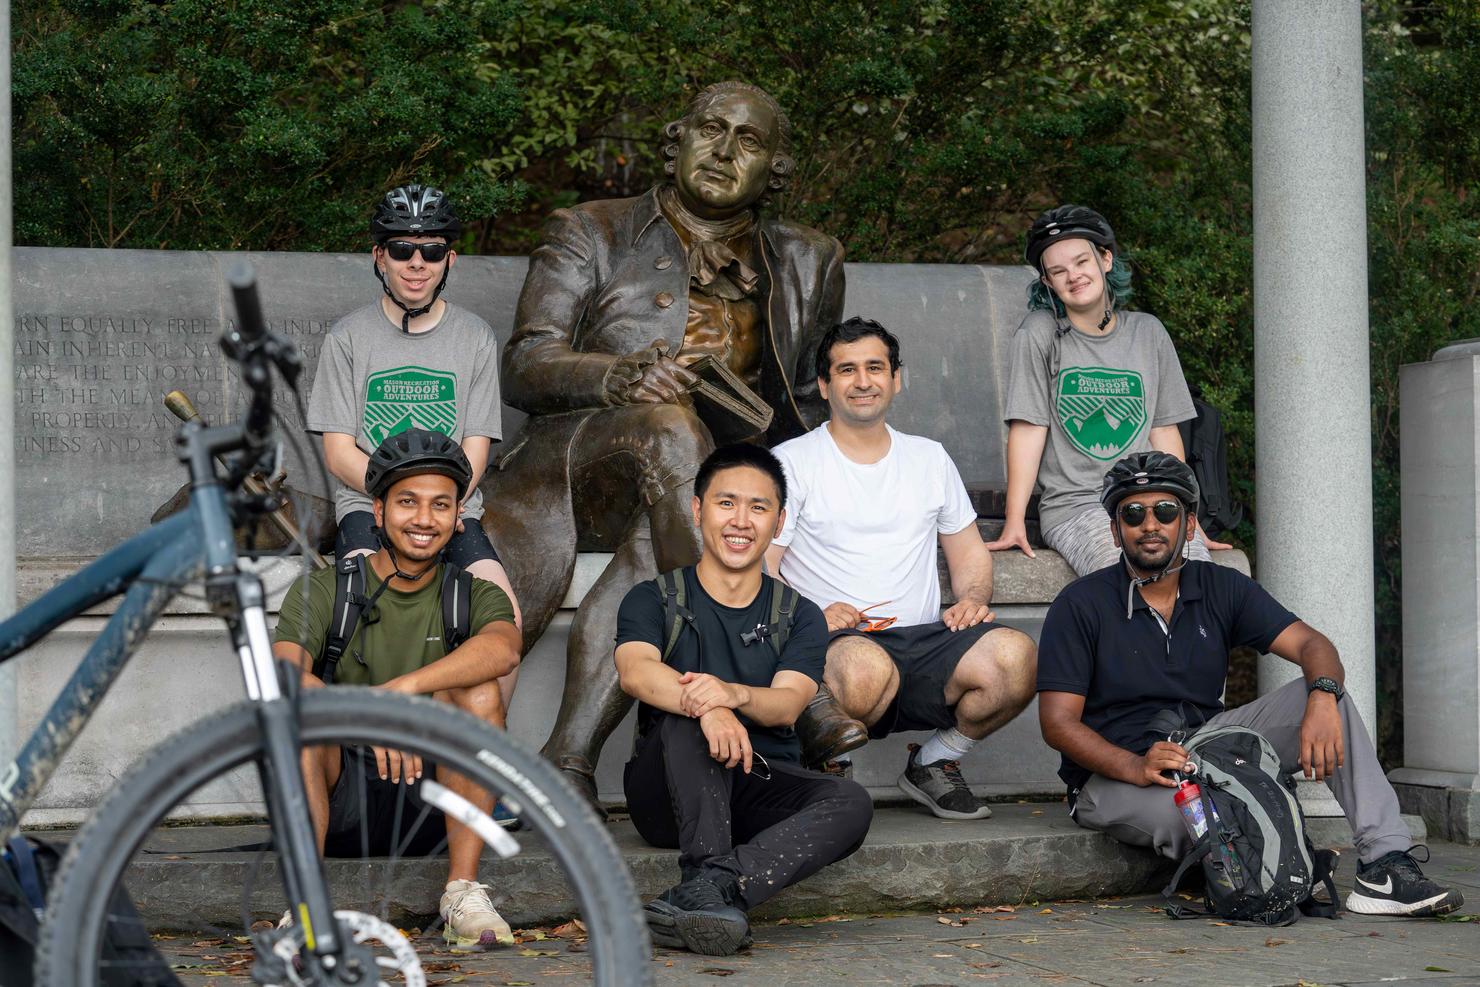 A group of cyclists take a break at the George Mason Memorial in Washington, D.C.